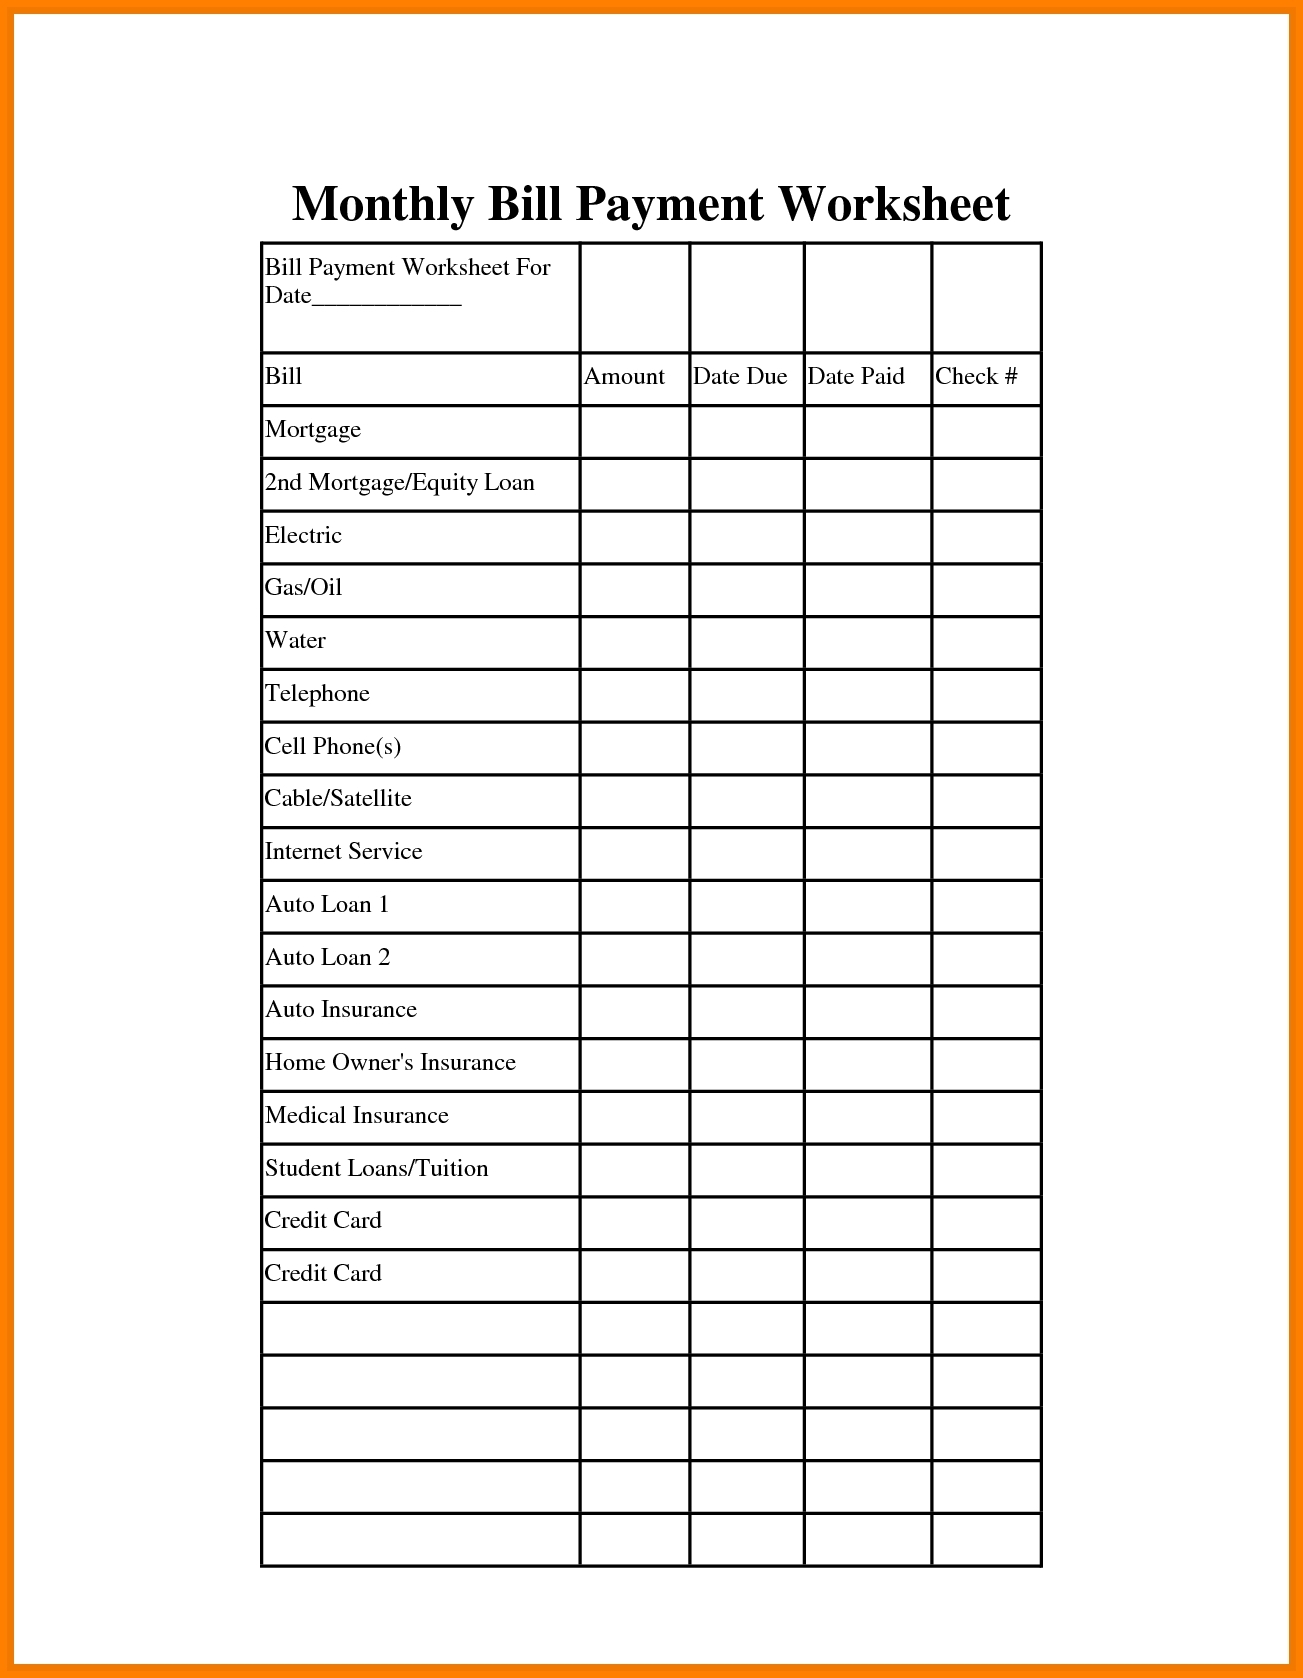 Free Monthly Bill Payment Sheet | Template Calendar Printable intended for Blank Monthly Bill Payment Sheet